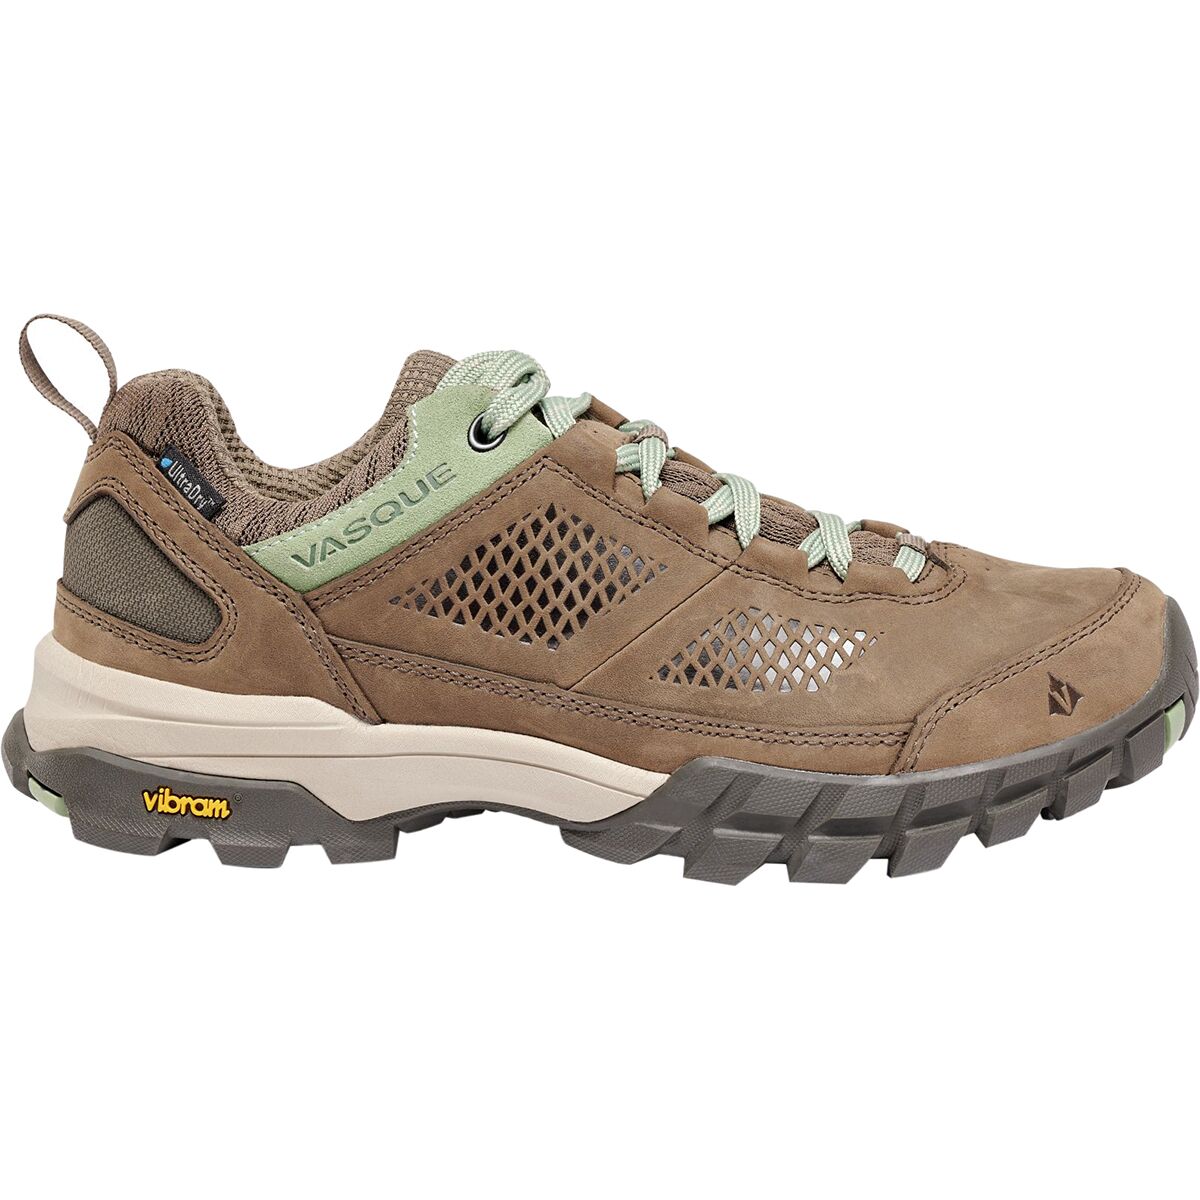 Vasque Talus AT Low UltraDry Wide Hiking Shoe - Women's